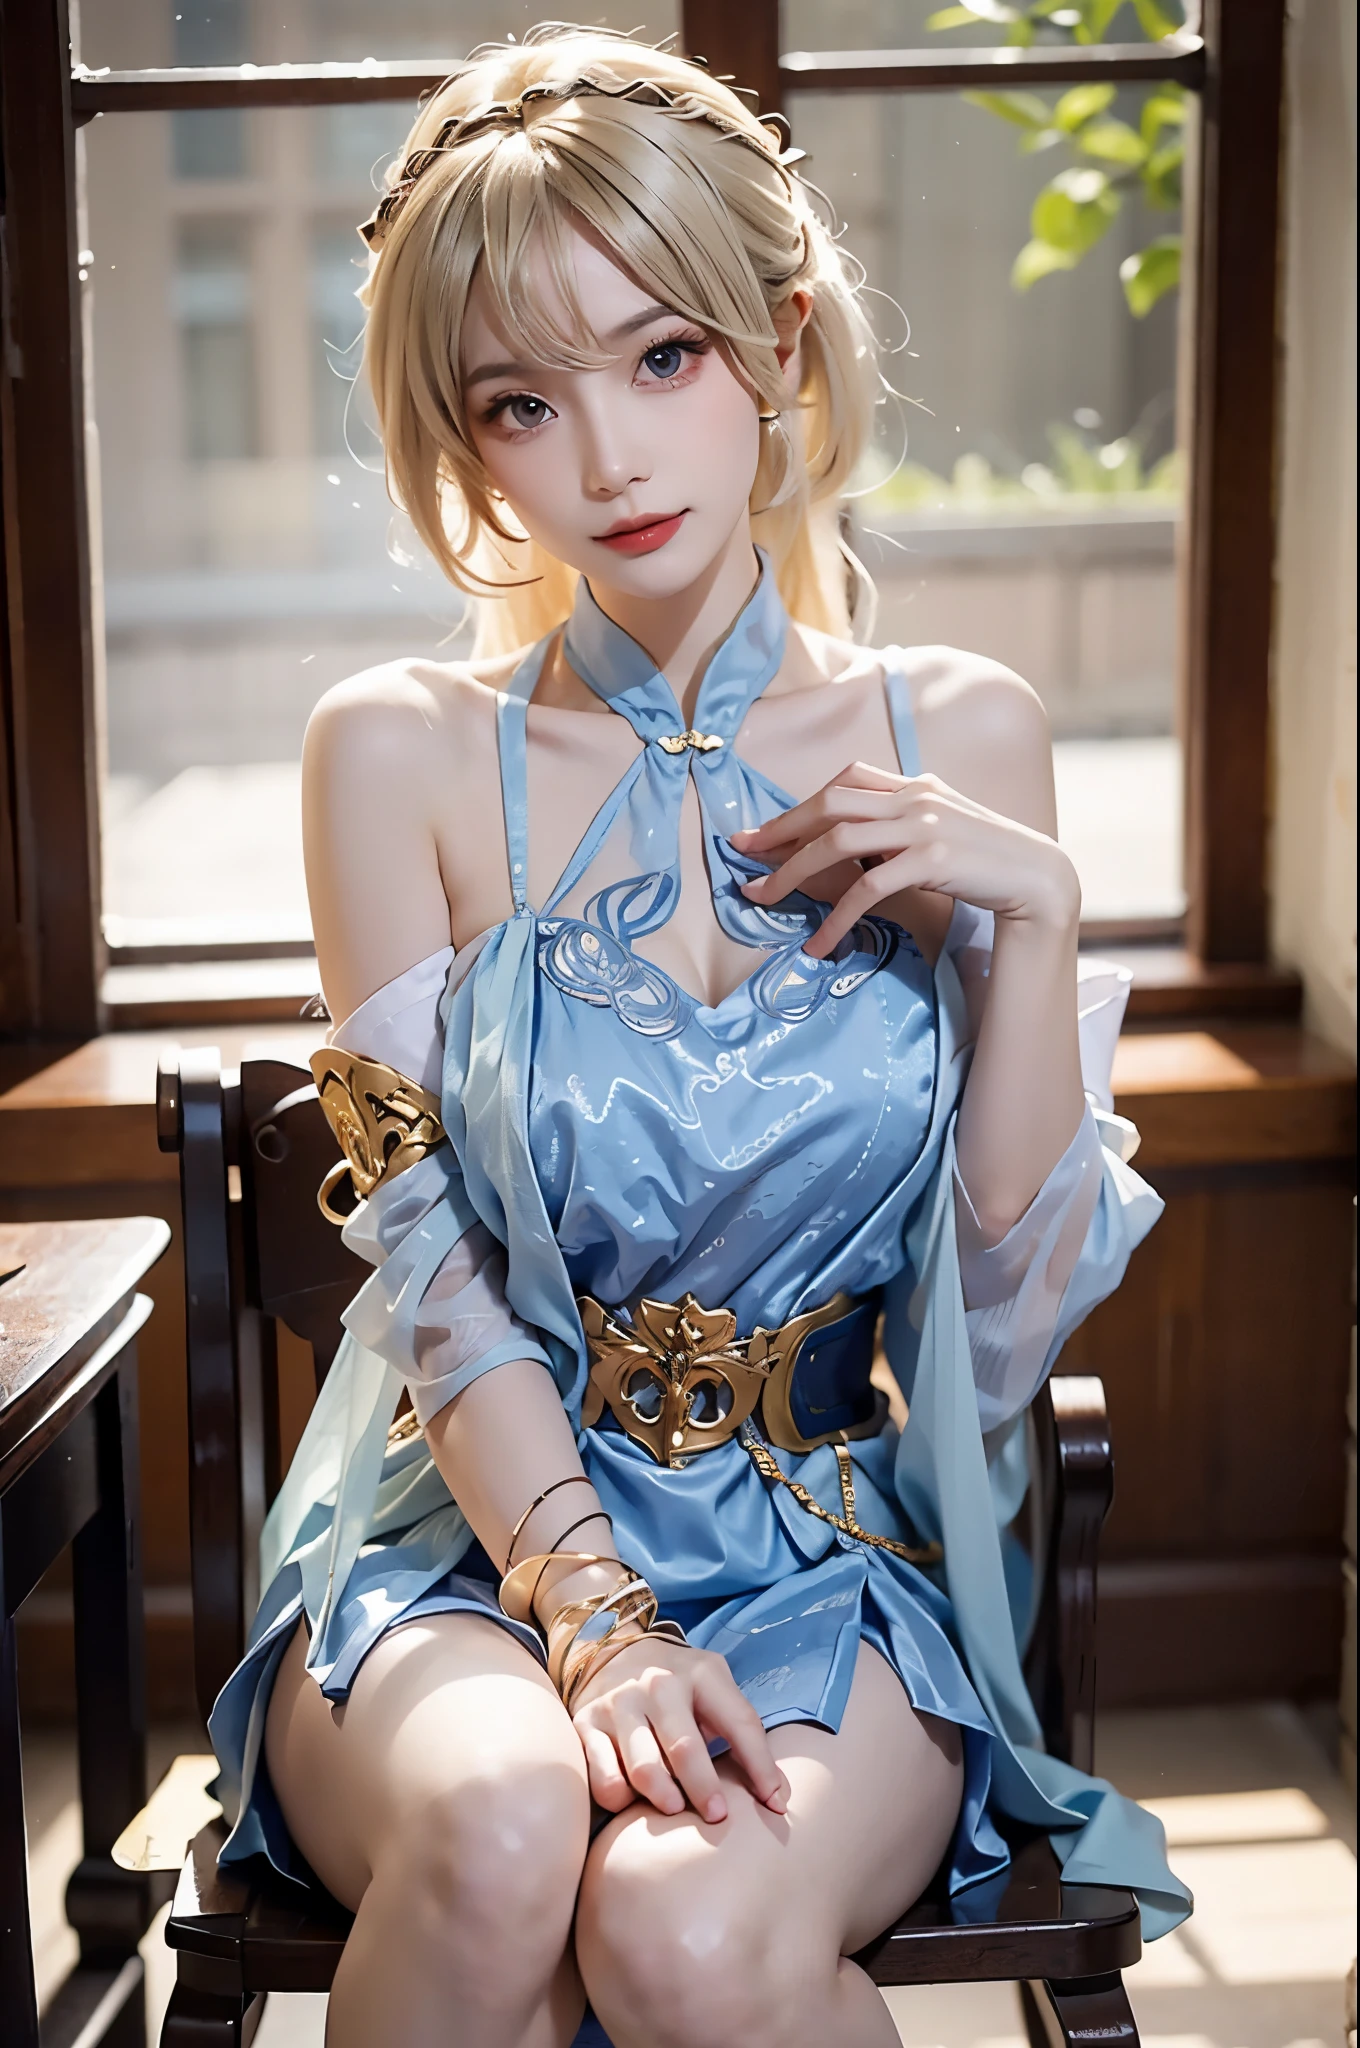 yinziping,china dress, ((full body)), Shot from random angles, 22-year-old Japanese model, Slim, thin waist, curls, Jie Kang , ((bare shoulders)), ((The skirt is short)), high waist, nice belt, blond hair, warm light, Warm toned slender legs, cross legs, in the classroom, sitting on the table in the classroom, warm light, warm color palette, dynamic poses, pose elegantly, blonde hair, striped hair, hair accessories, heart shaped pupils, cosmetic, faint smile, Shy, lick lips, romanticism, Social realism, chiaroscuro, motion blur, relief, Sony FE General Manager, ultra high definition, masterpiece, textured skin, Super details, best quality